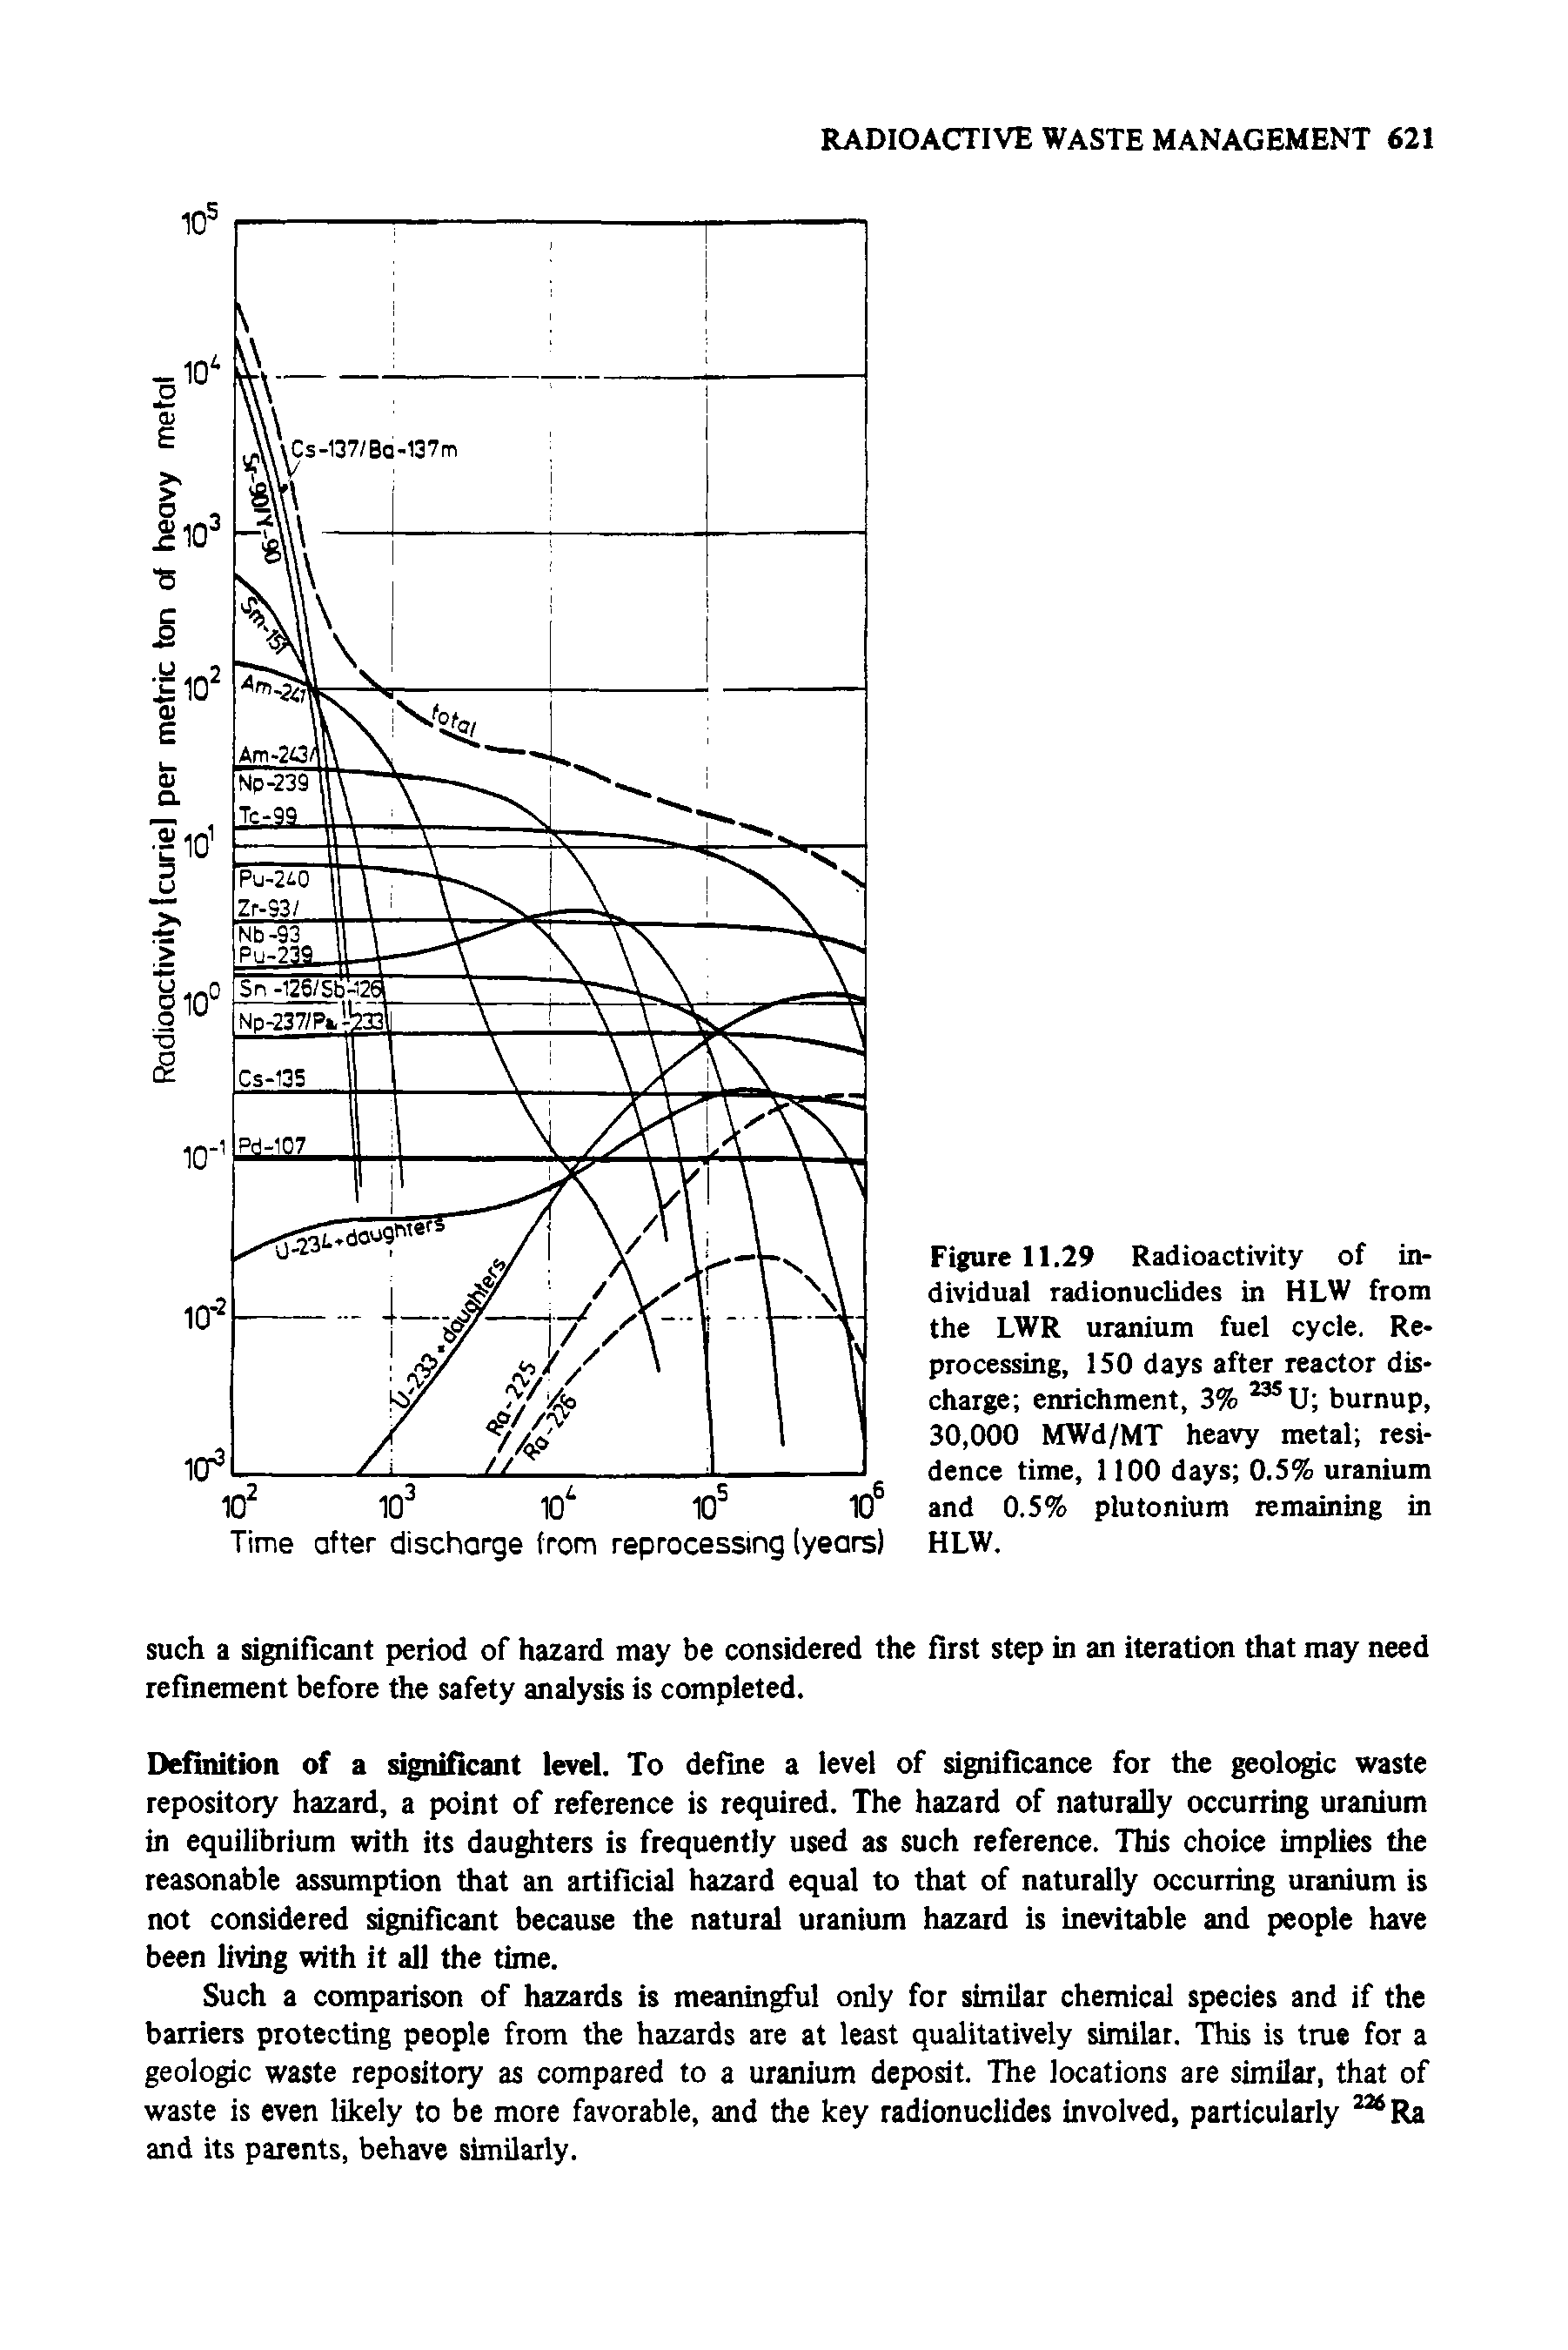 Figure 11.29 Radioactivity of individual radionuclides in HLW from the LWR uranium fuel cycle. Reprocessing, 150 days after reactor discharge enrichment, 3% U burnup, 30,000 MWd/MT heavy metal residence time, 1100 days 0.5% uranium and 0.5% plutonium remaining in HLW.